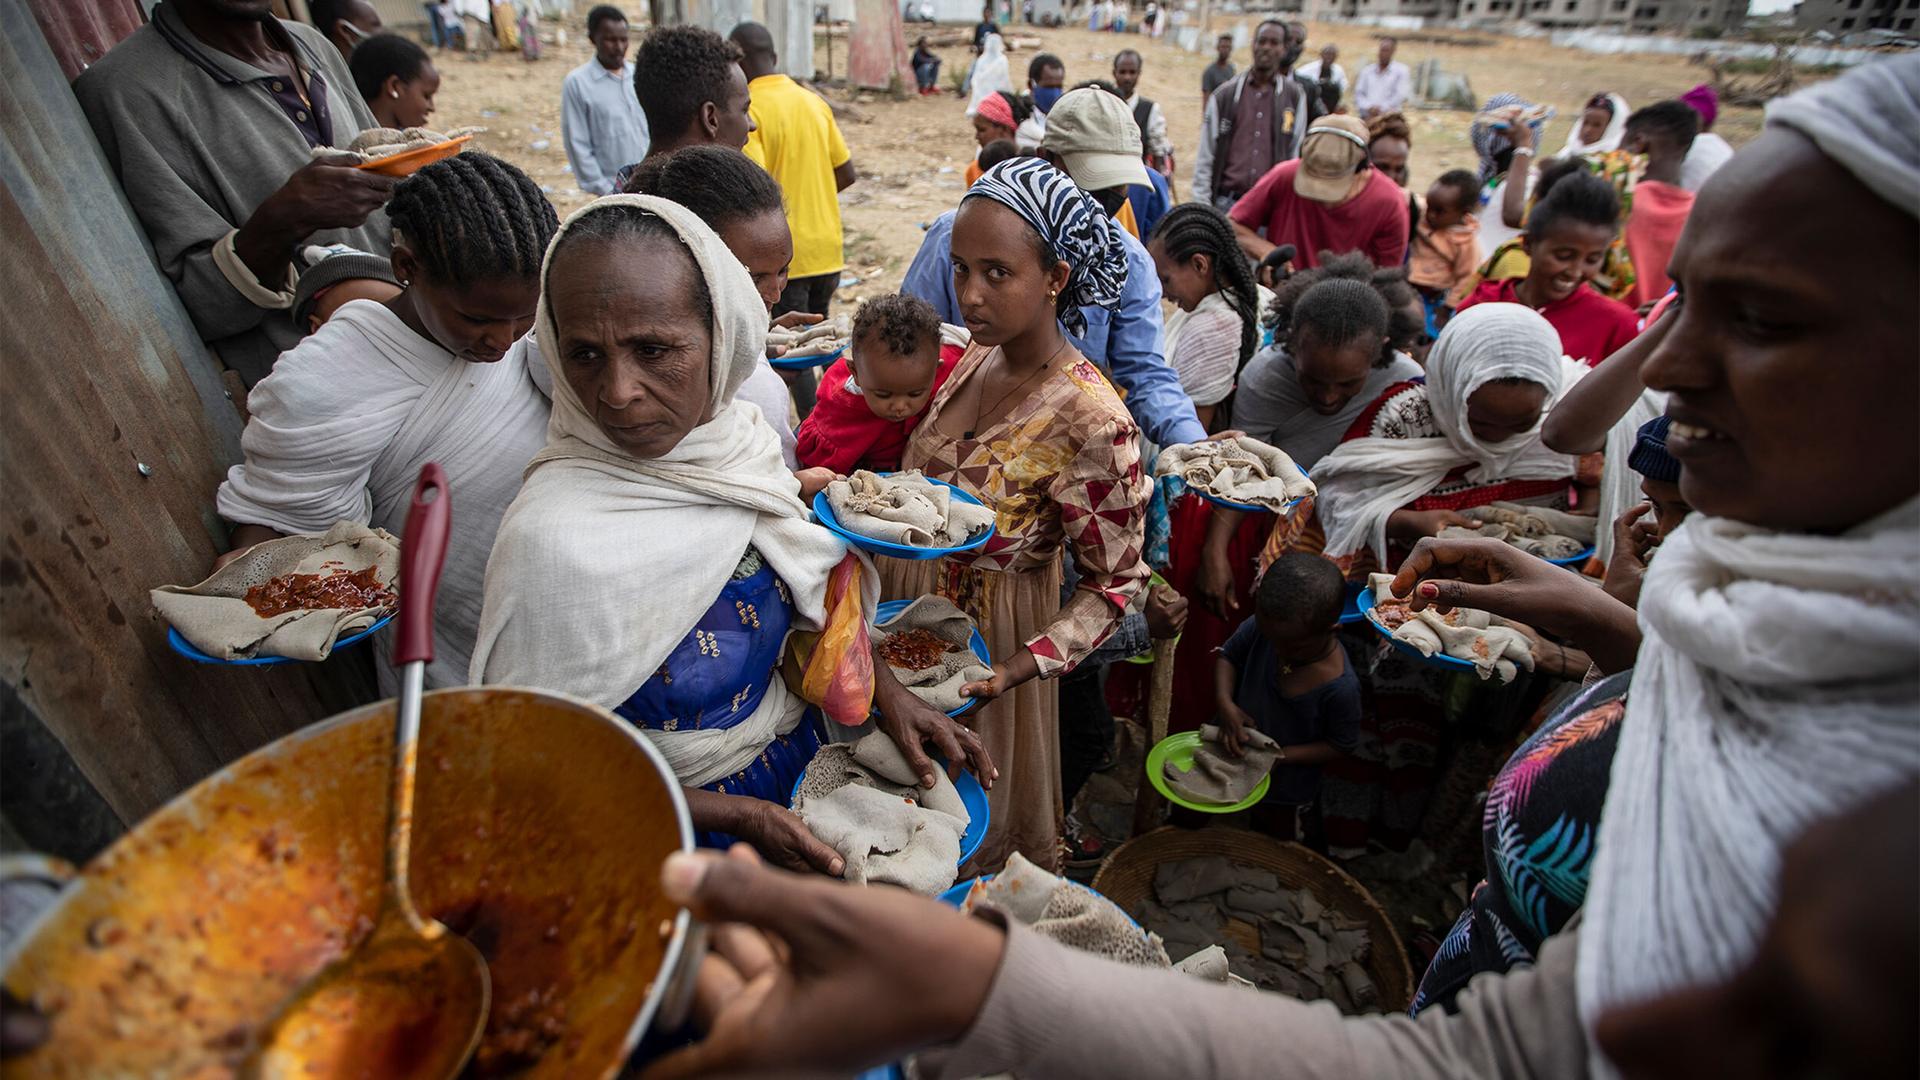 A group of people are shown waiting in line where plates of traditional Ethiopian food are being served.